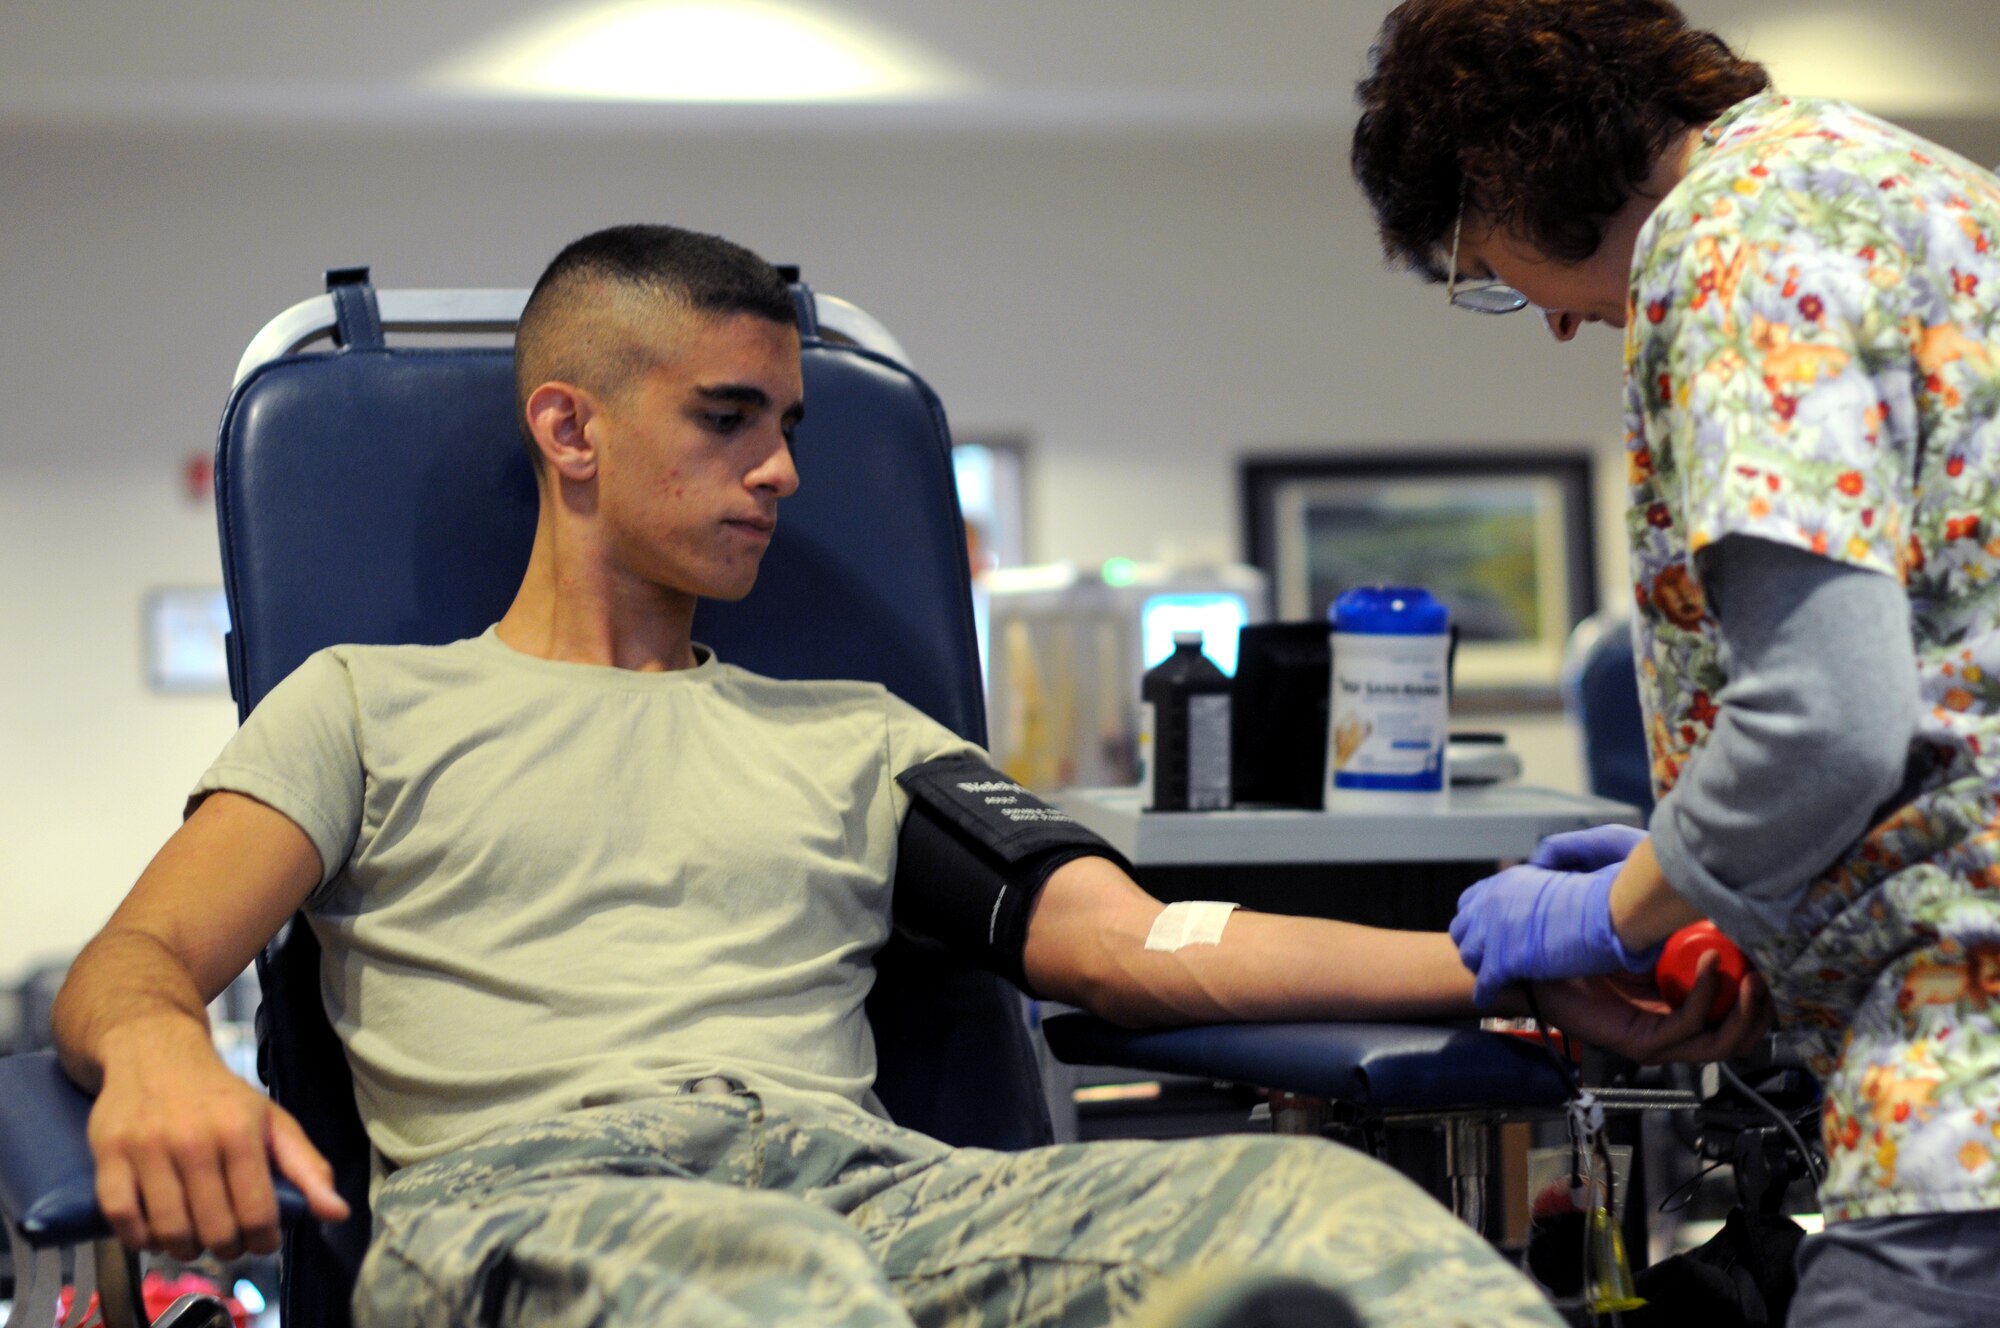 A picture of U.S. Air Force Airman 1st Class Matthew Baruffi, an egress technician from the New Jersey Air National Guard's 177th Fighter Wing, giving blood during a blood drive.